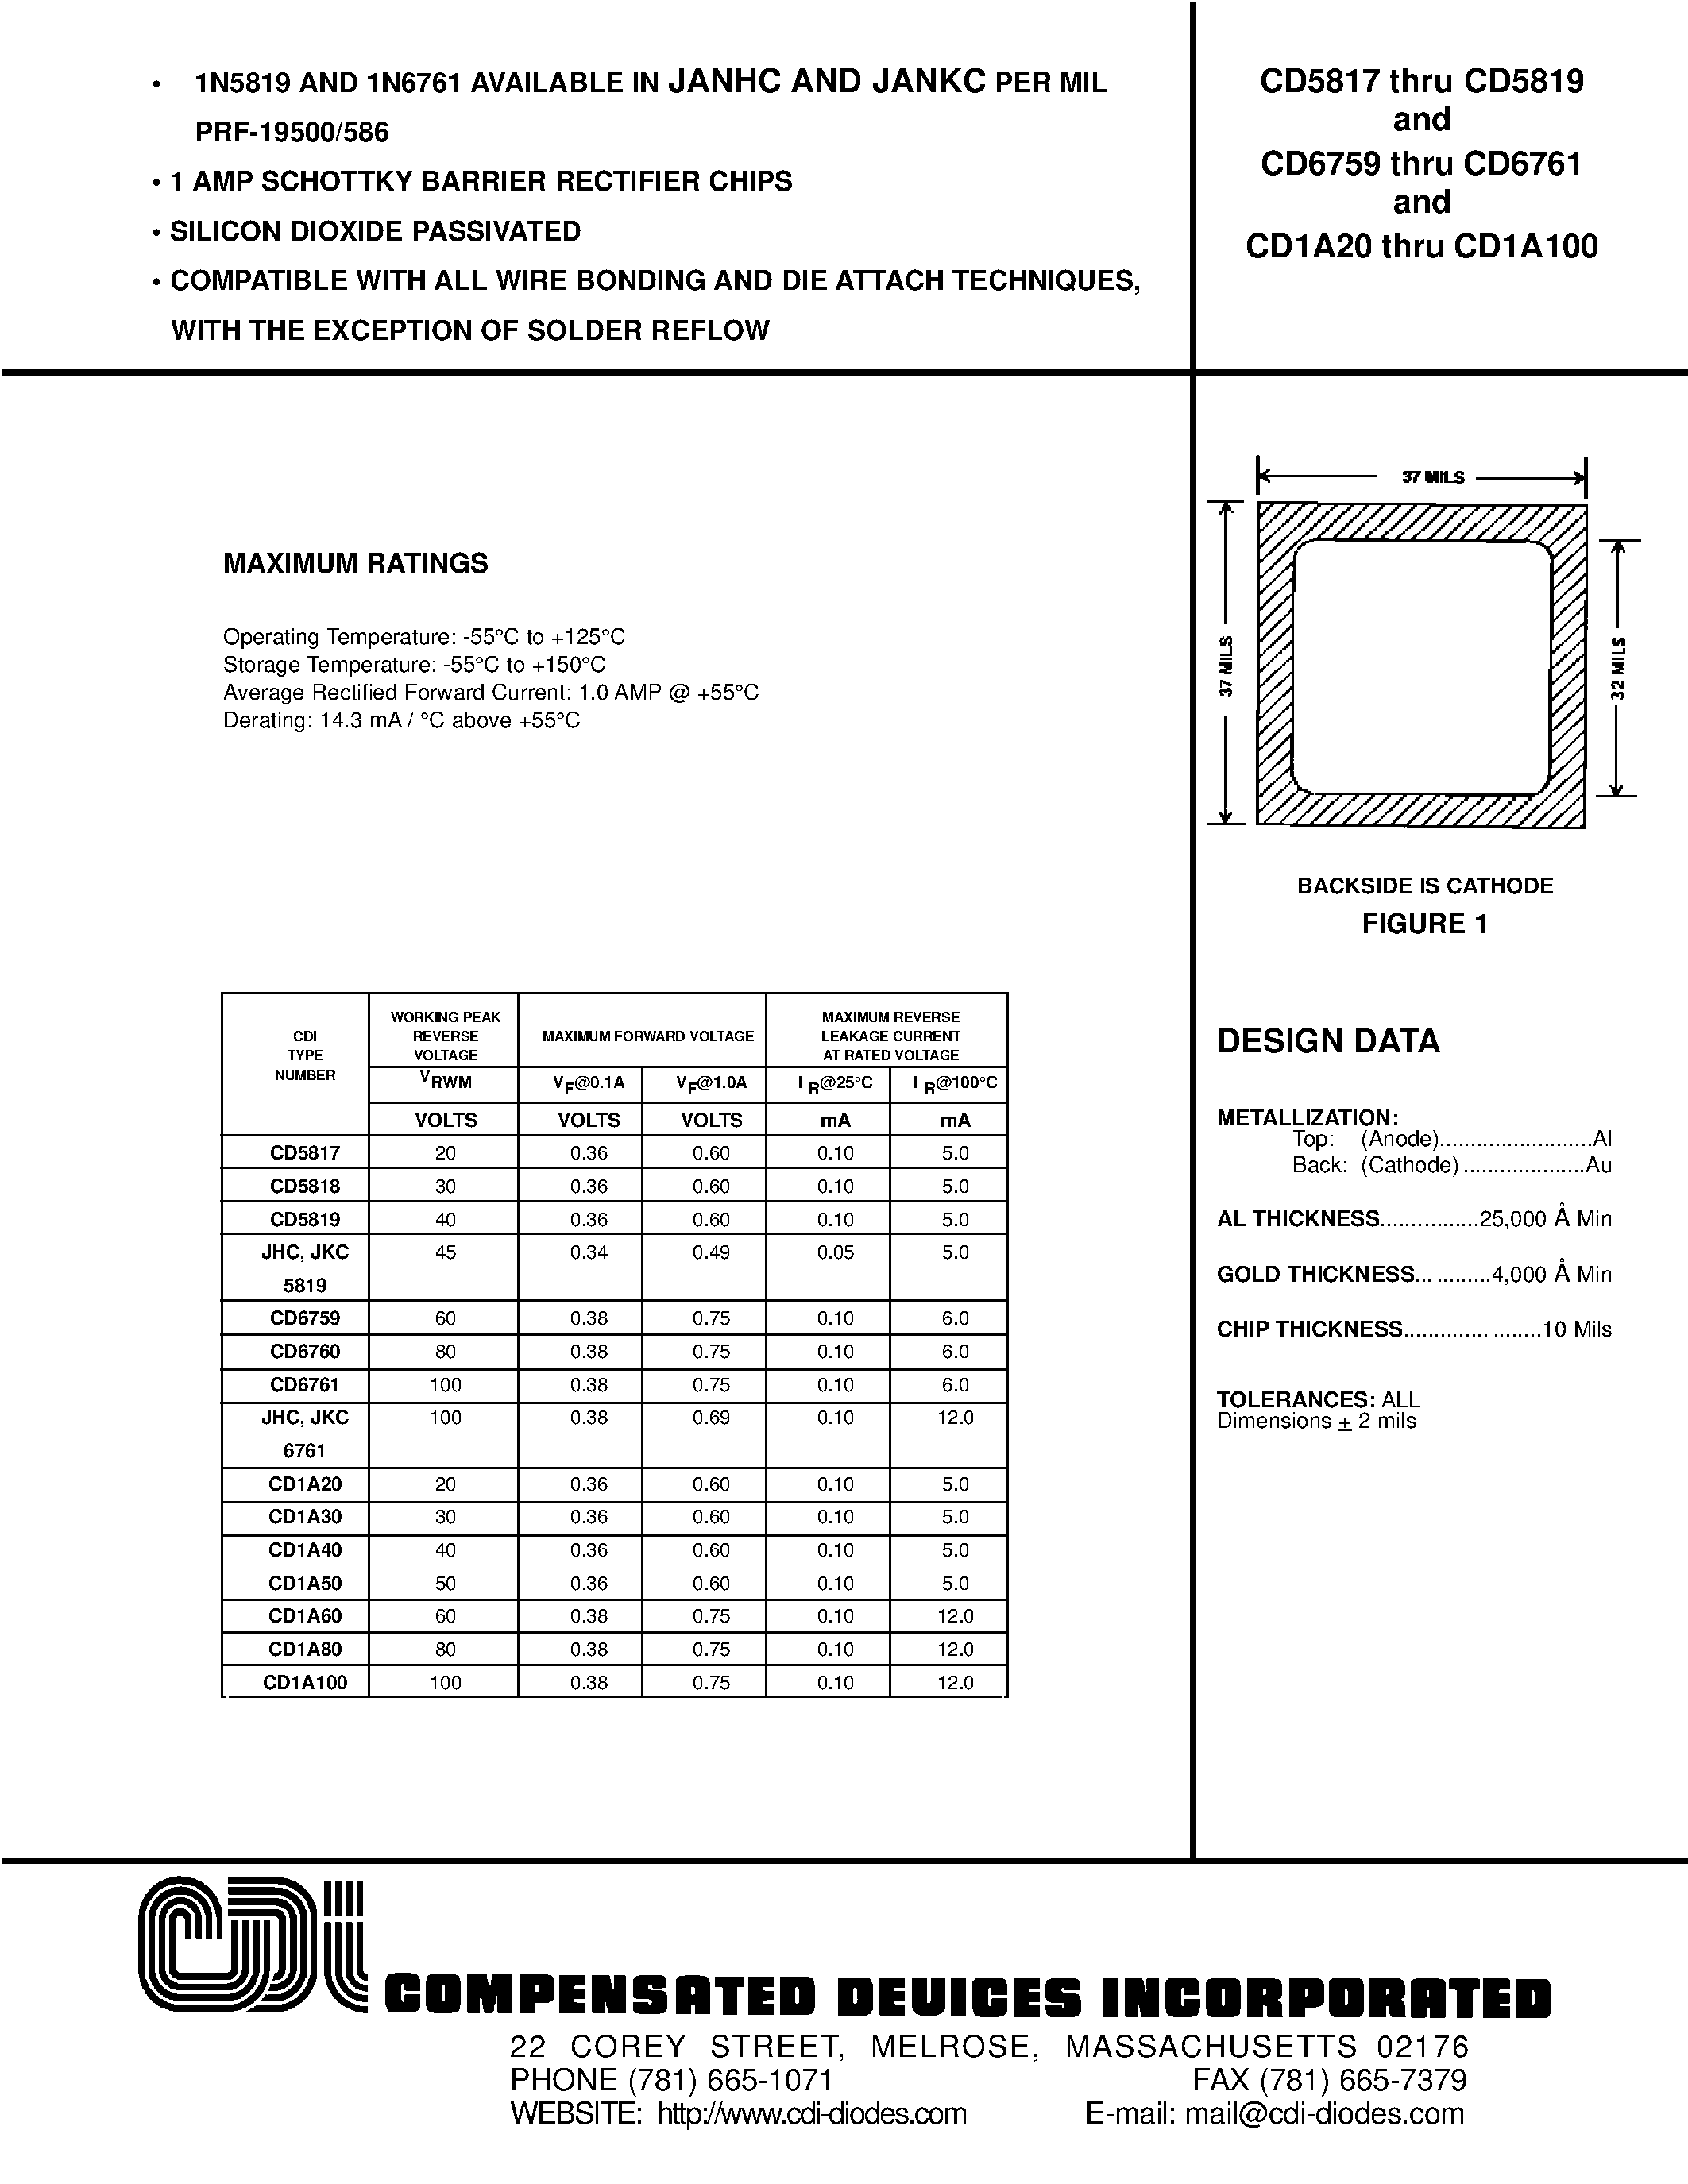 Datasheet CD1A50 - 1 AMP SCHOTTKY BARRIER RECTIFIER CHIPS page 1